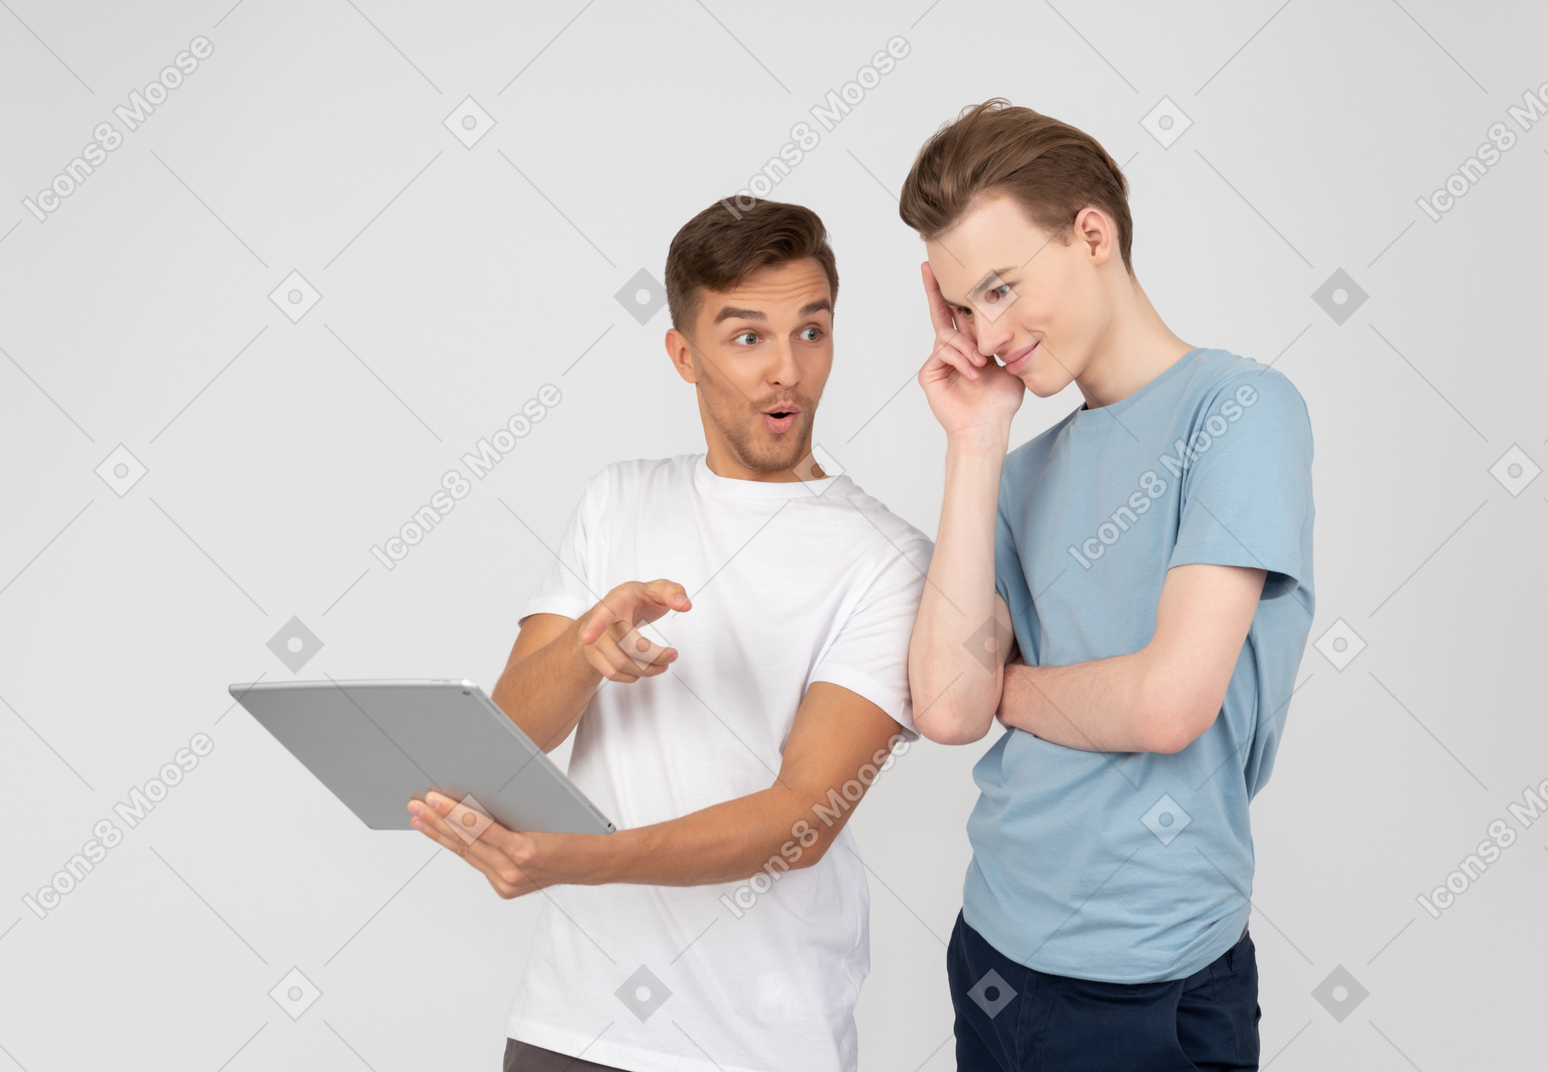 Brothers looking at tablet and discussing it